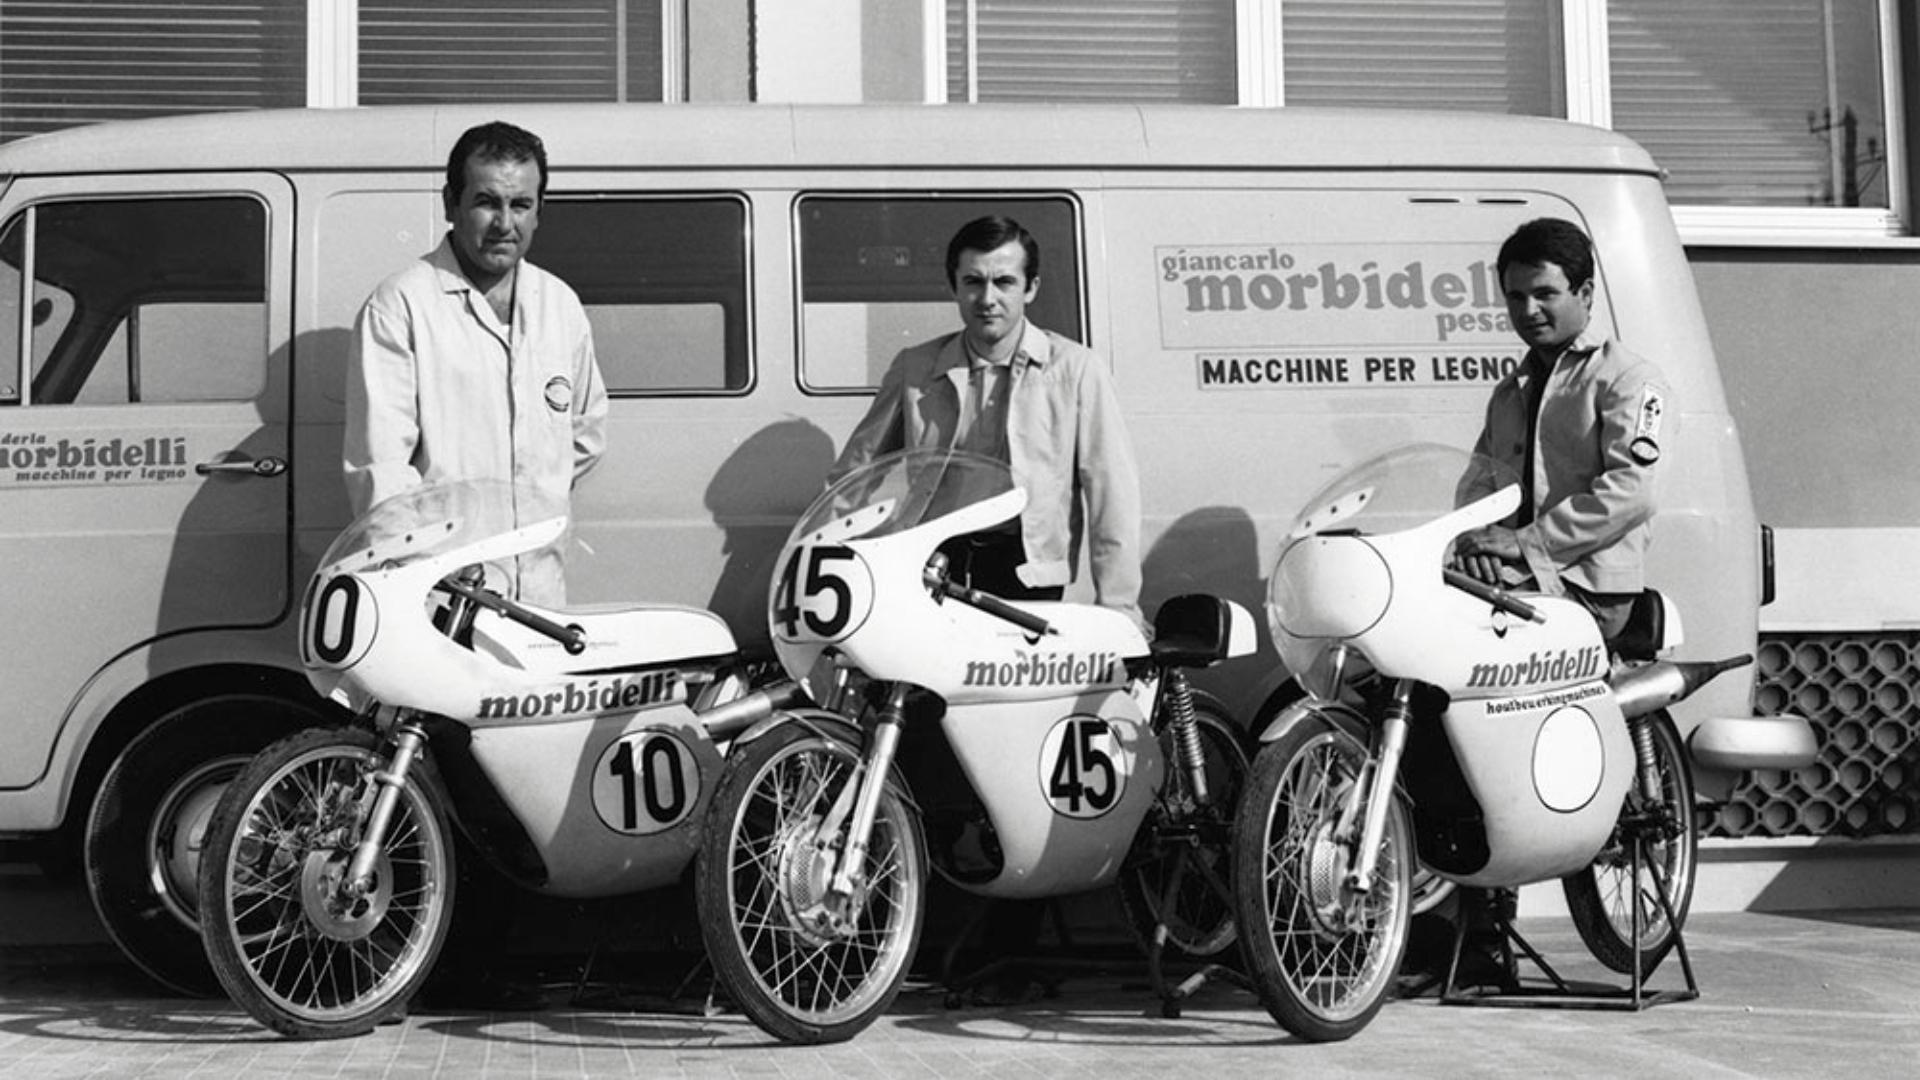 Morbidelli - A Story of Men and Fast Motorcycles